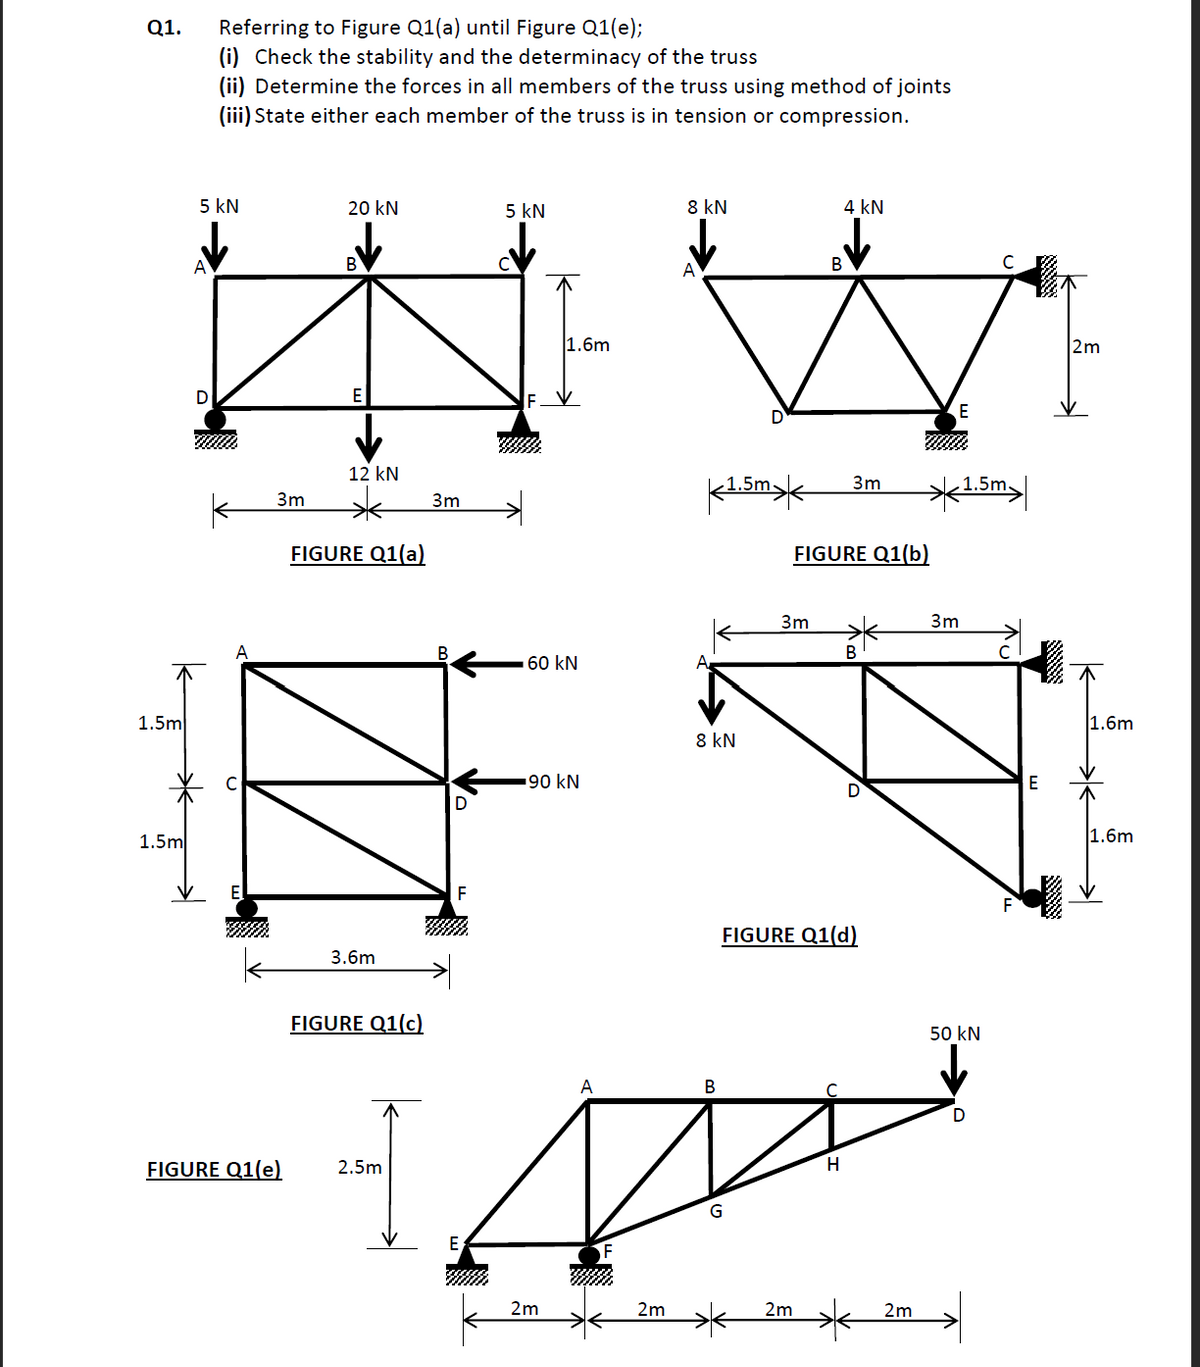 Q1.
1.5m
1.5m
Referring to Figure Q1(a) until Figure Q1(e);
(i) Check the stability and the determinacy of the truss
(ii) Determine the forces in all members of the truss using method of joints
(iii) State either each member of the truss is in tension or compression.
5 kN
D
C
3m
FIGURE Q1(e)
20 kN
B
E
12 kN
FIGURE Q1(a)
3.6m
FIGURE Q1(c)
2.5m
3m
D
5 kN
E
1.6m
60 kN
▪90 kN
2m
A
A
8 kN
2m
8 kN
1.5m><
G
3m
2m
4 kN
B
3m
FIGURE Q1(b)
H
FIGURE Q1(d)
D
*
2m
E
→1.5m|
3m
50 kN
E
2m
1.6m
1.6m